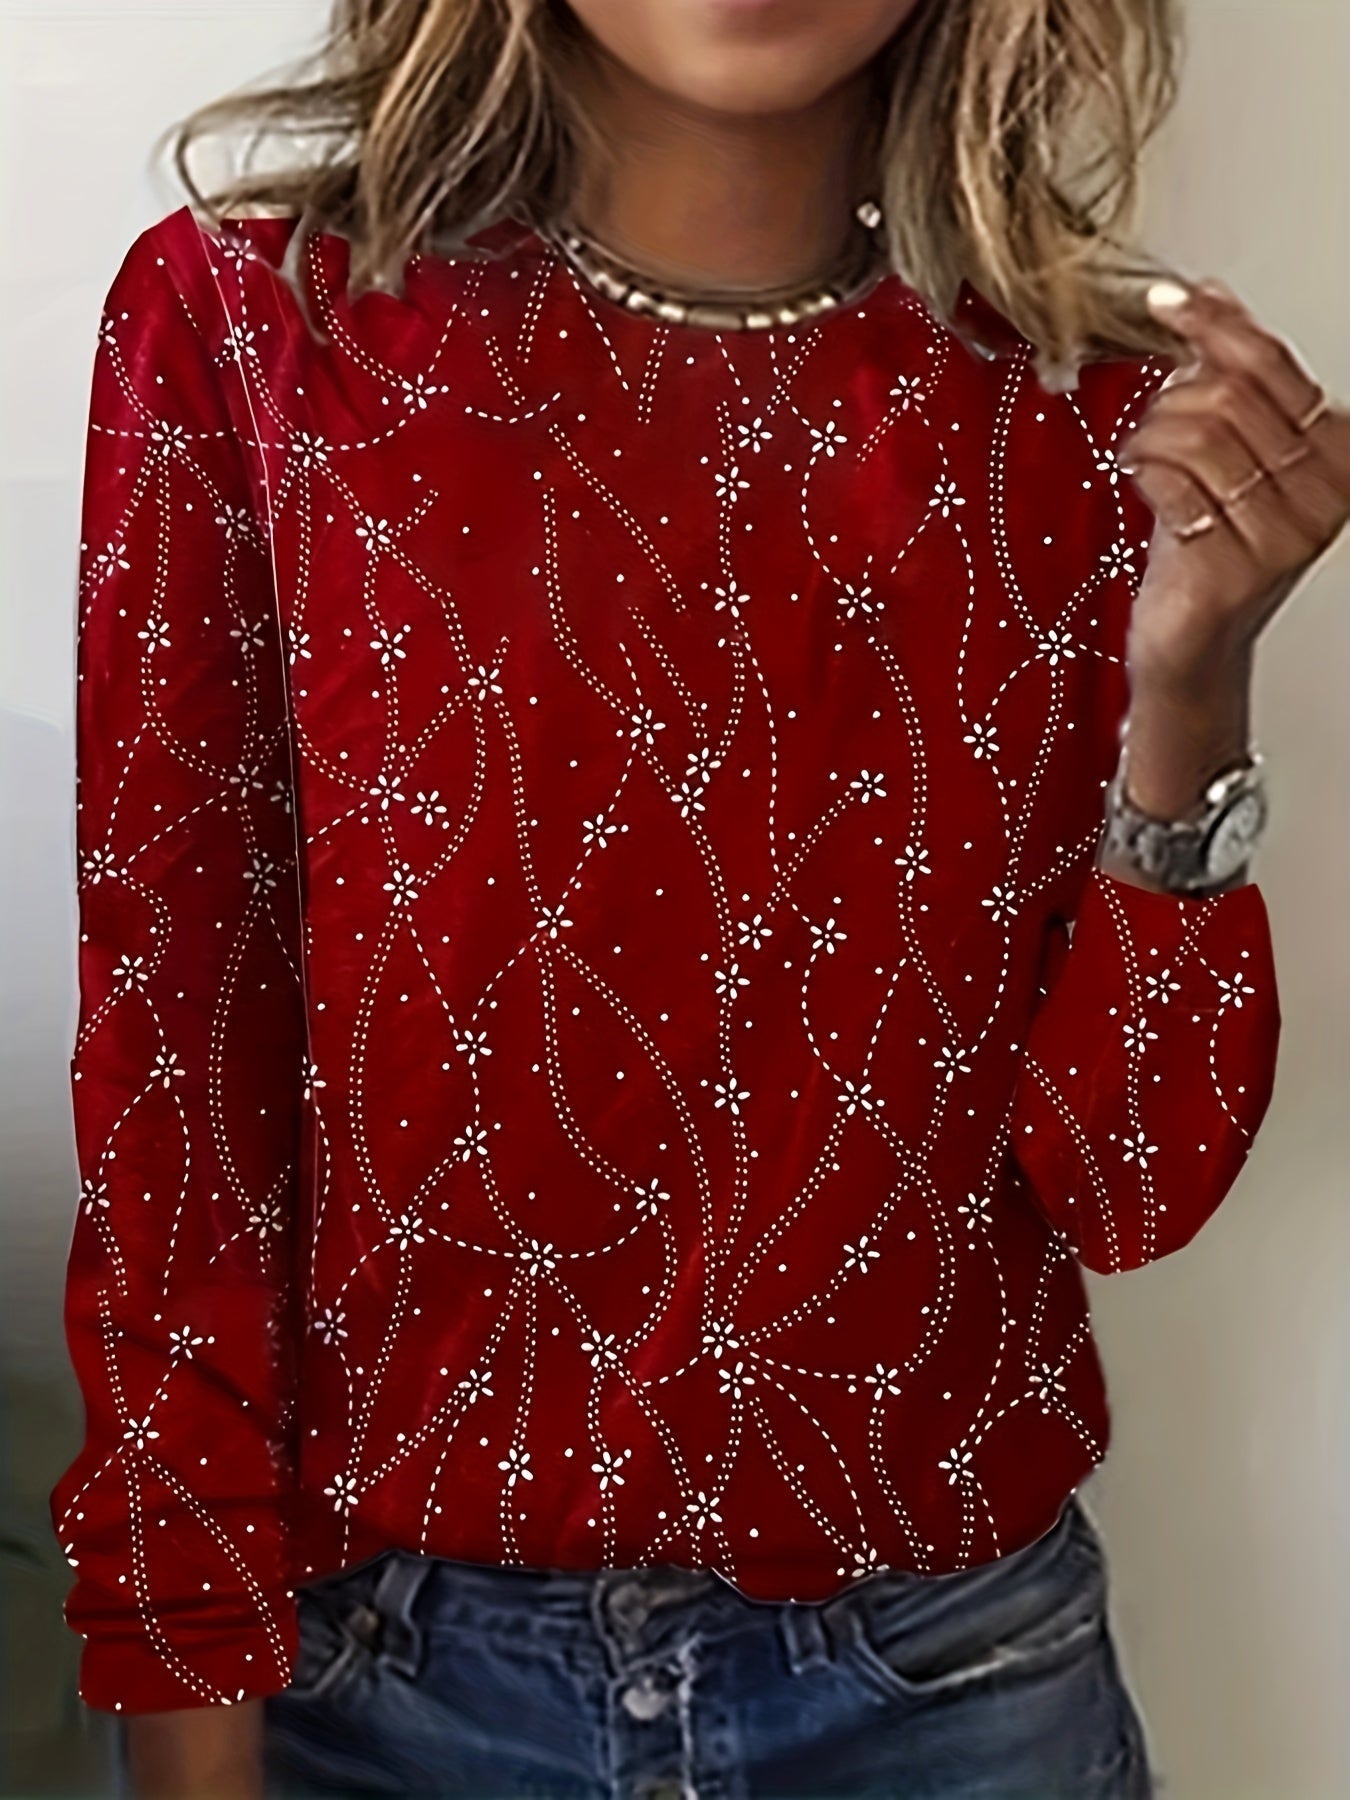 Floral Print Crew Neck T-Shirt, Casual Long Sleeve Top